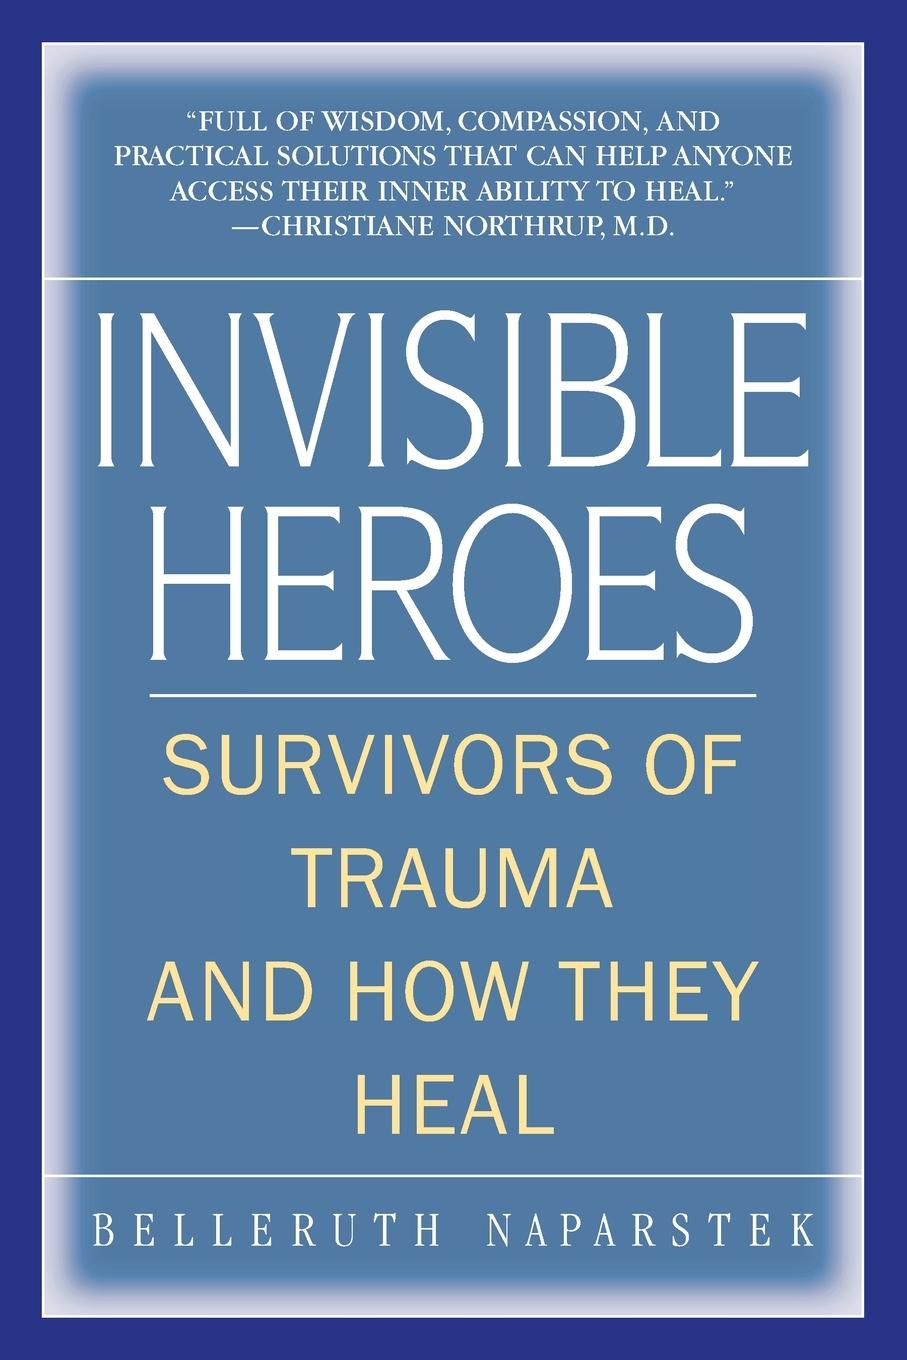 Invisible Heroes: Survivors of Trauma and How They Heal - Belleruth Naparstek